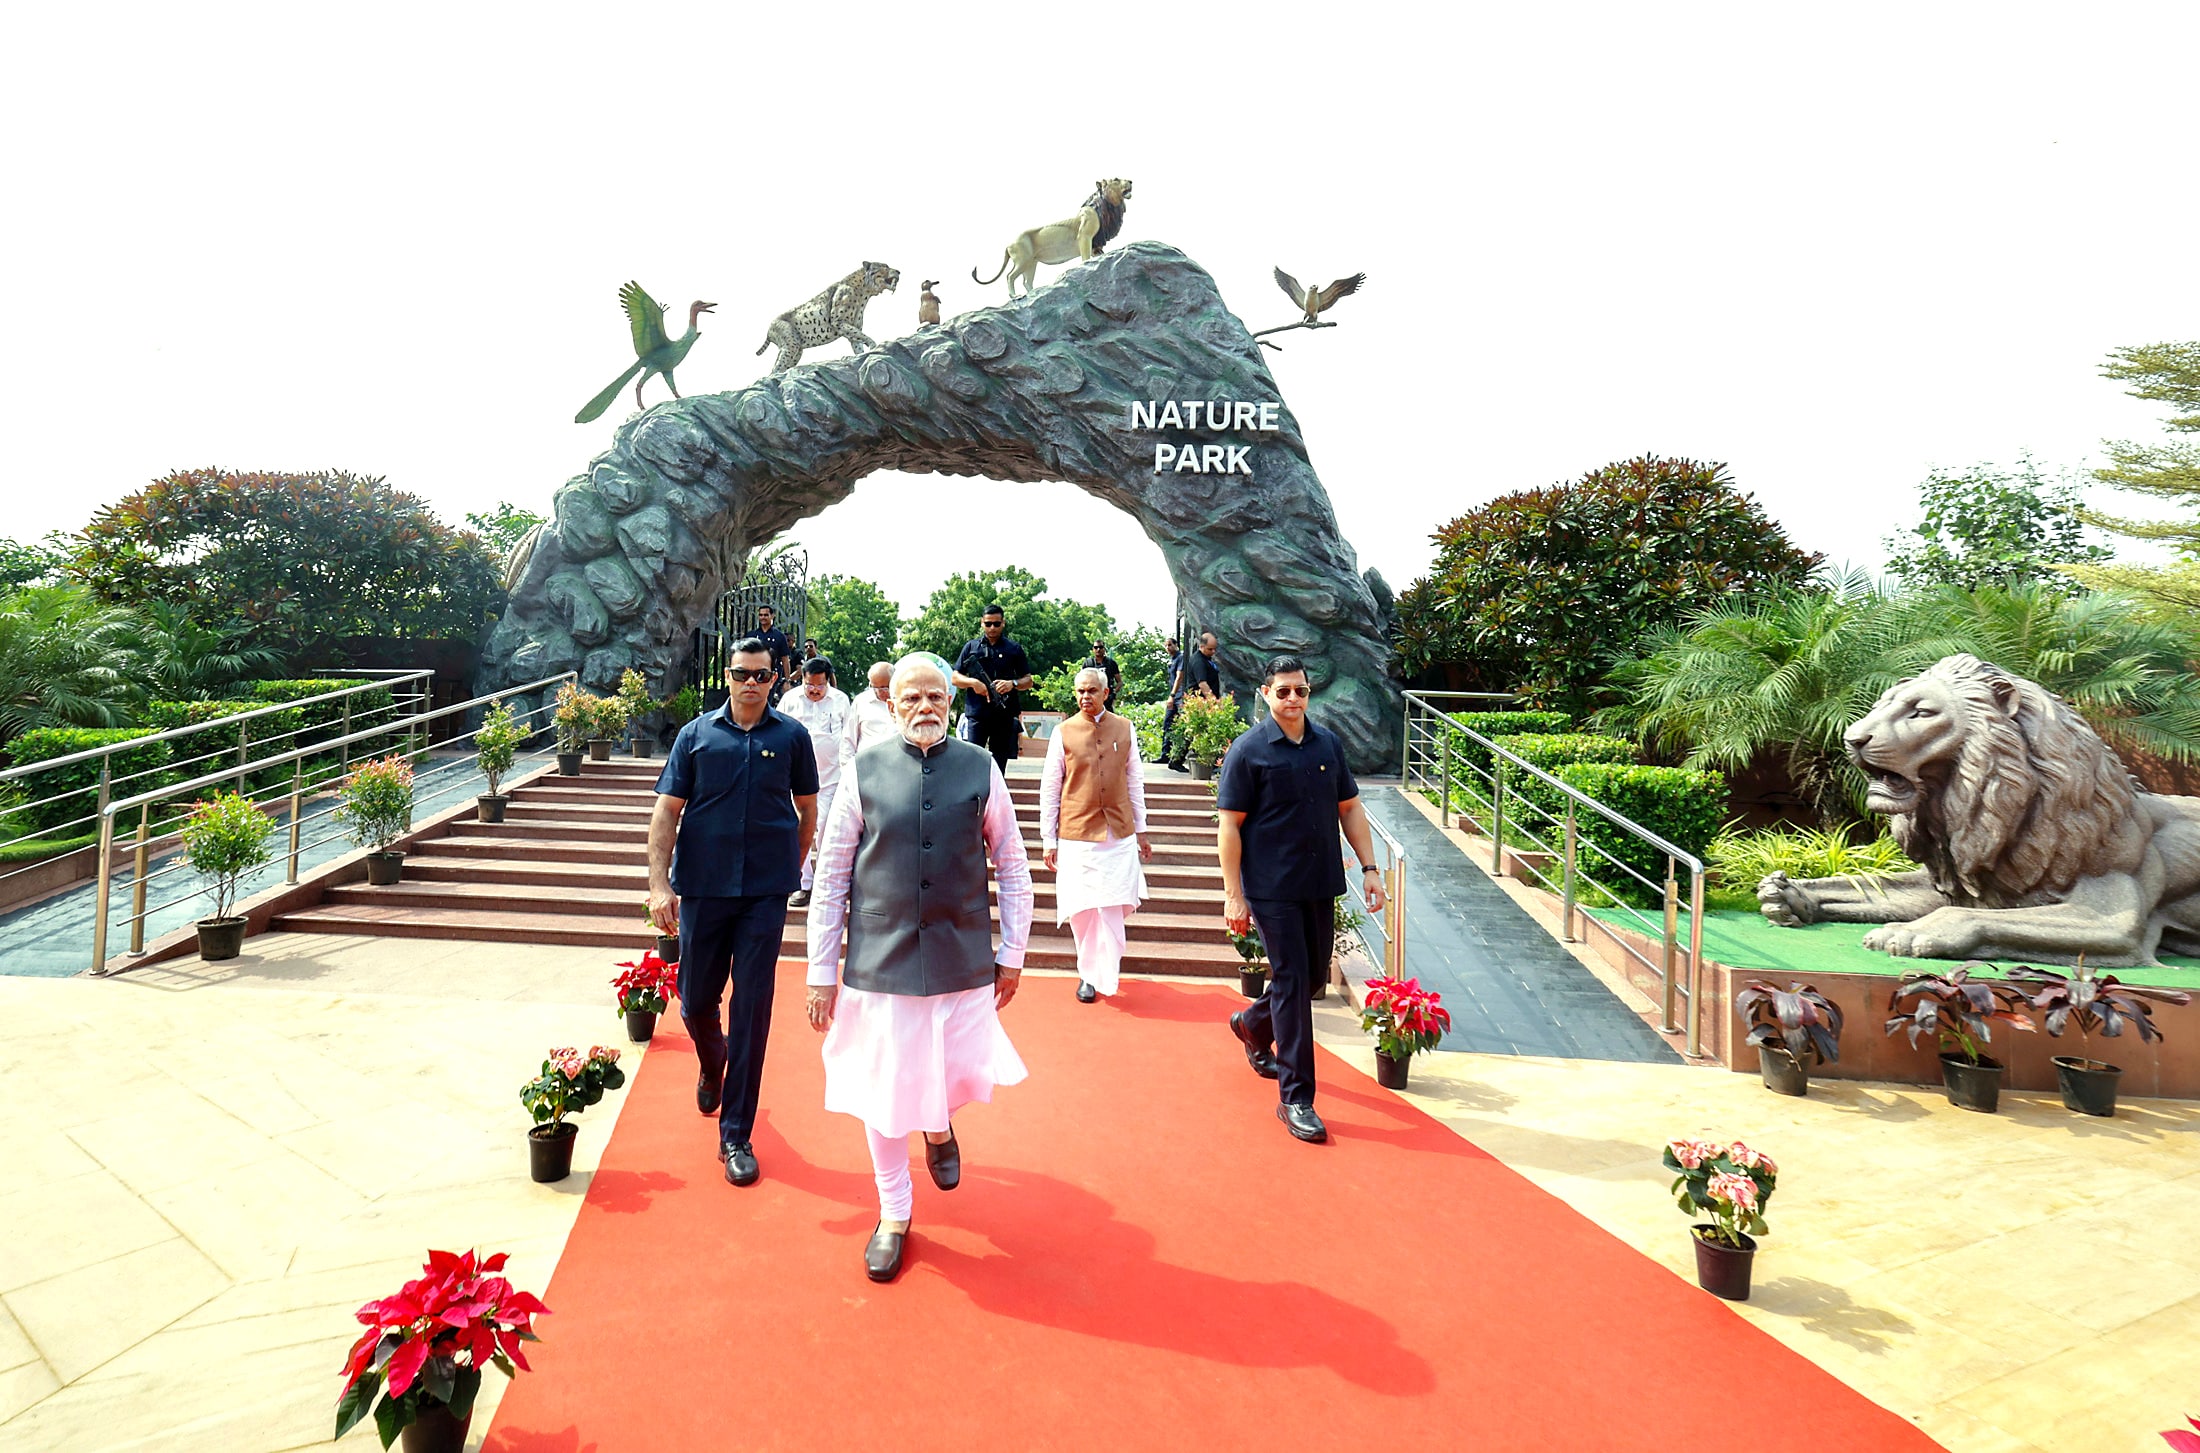 Prime Minister Narendra Modi visits Nature Park. Also seen here are Acharya Devvrat, Bhupendra Patel, CR Paatil and others.